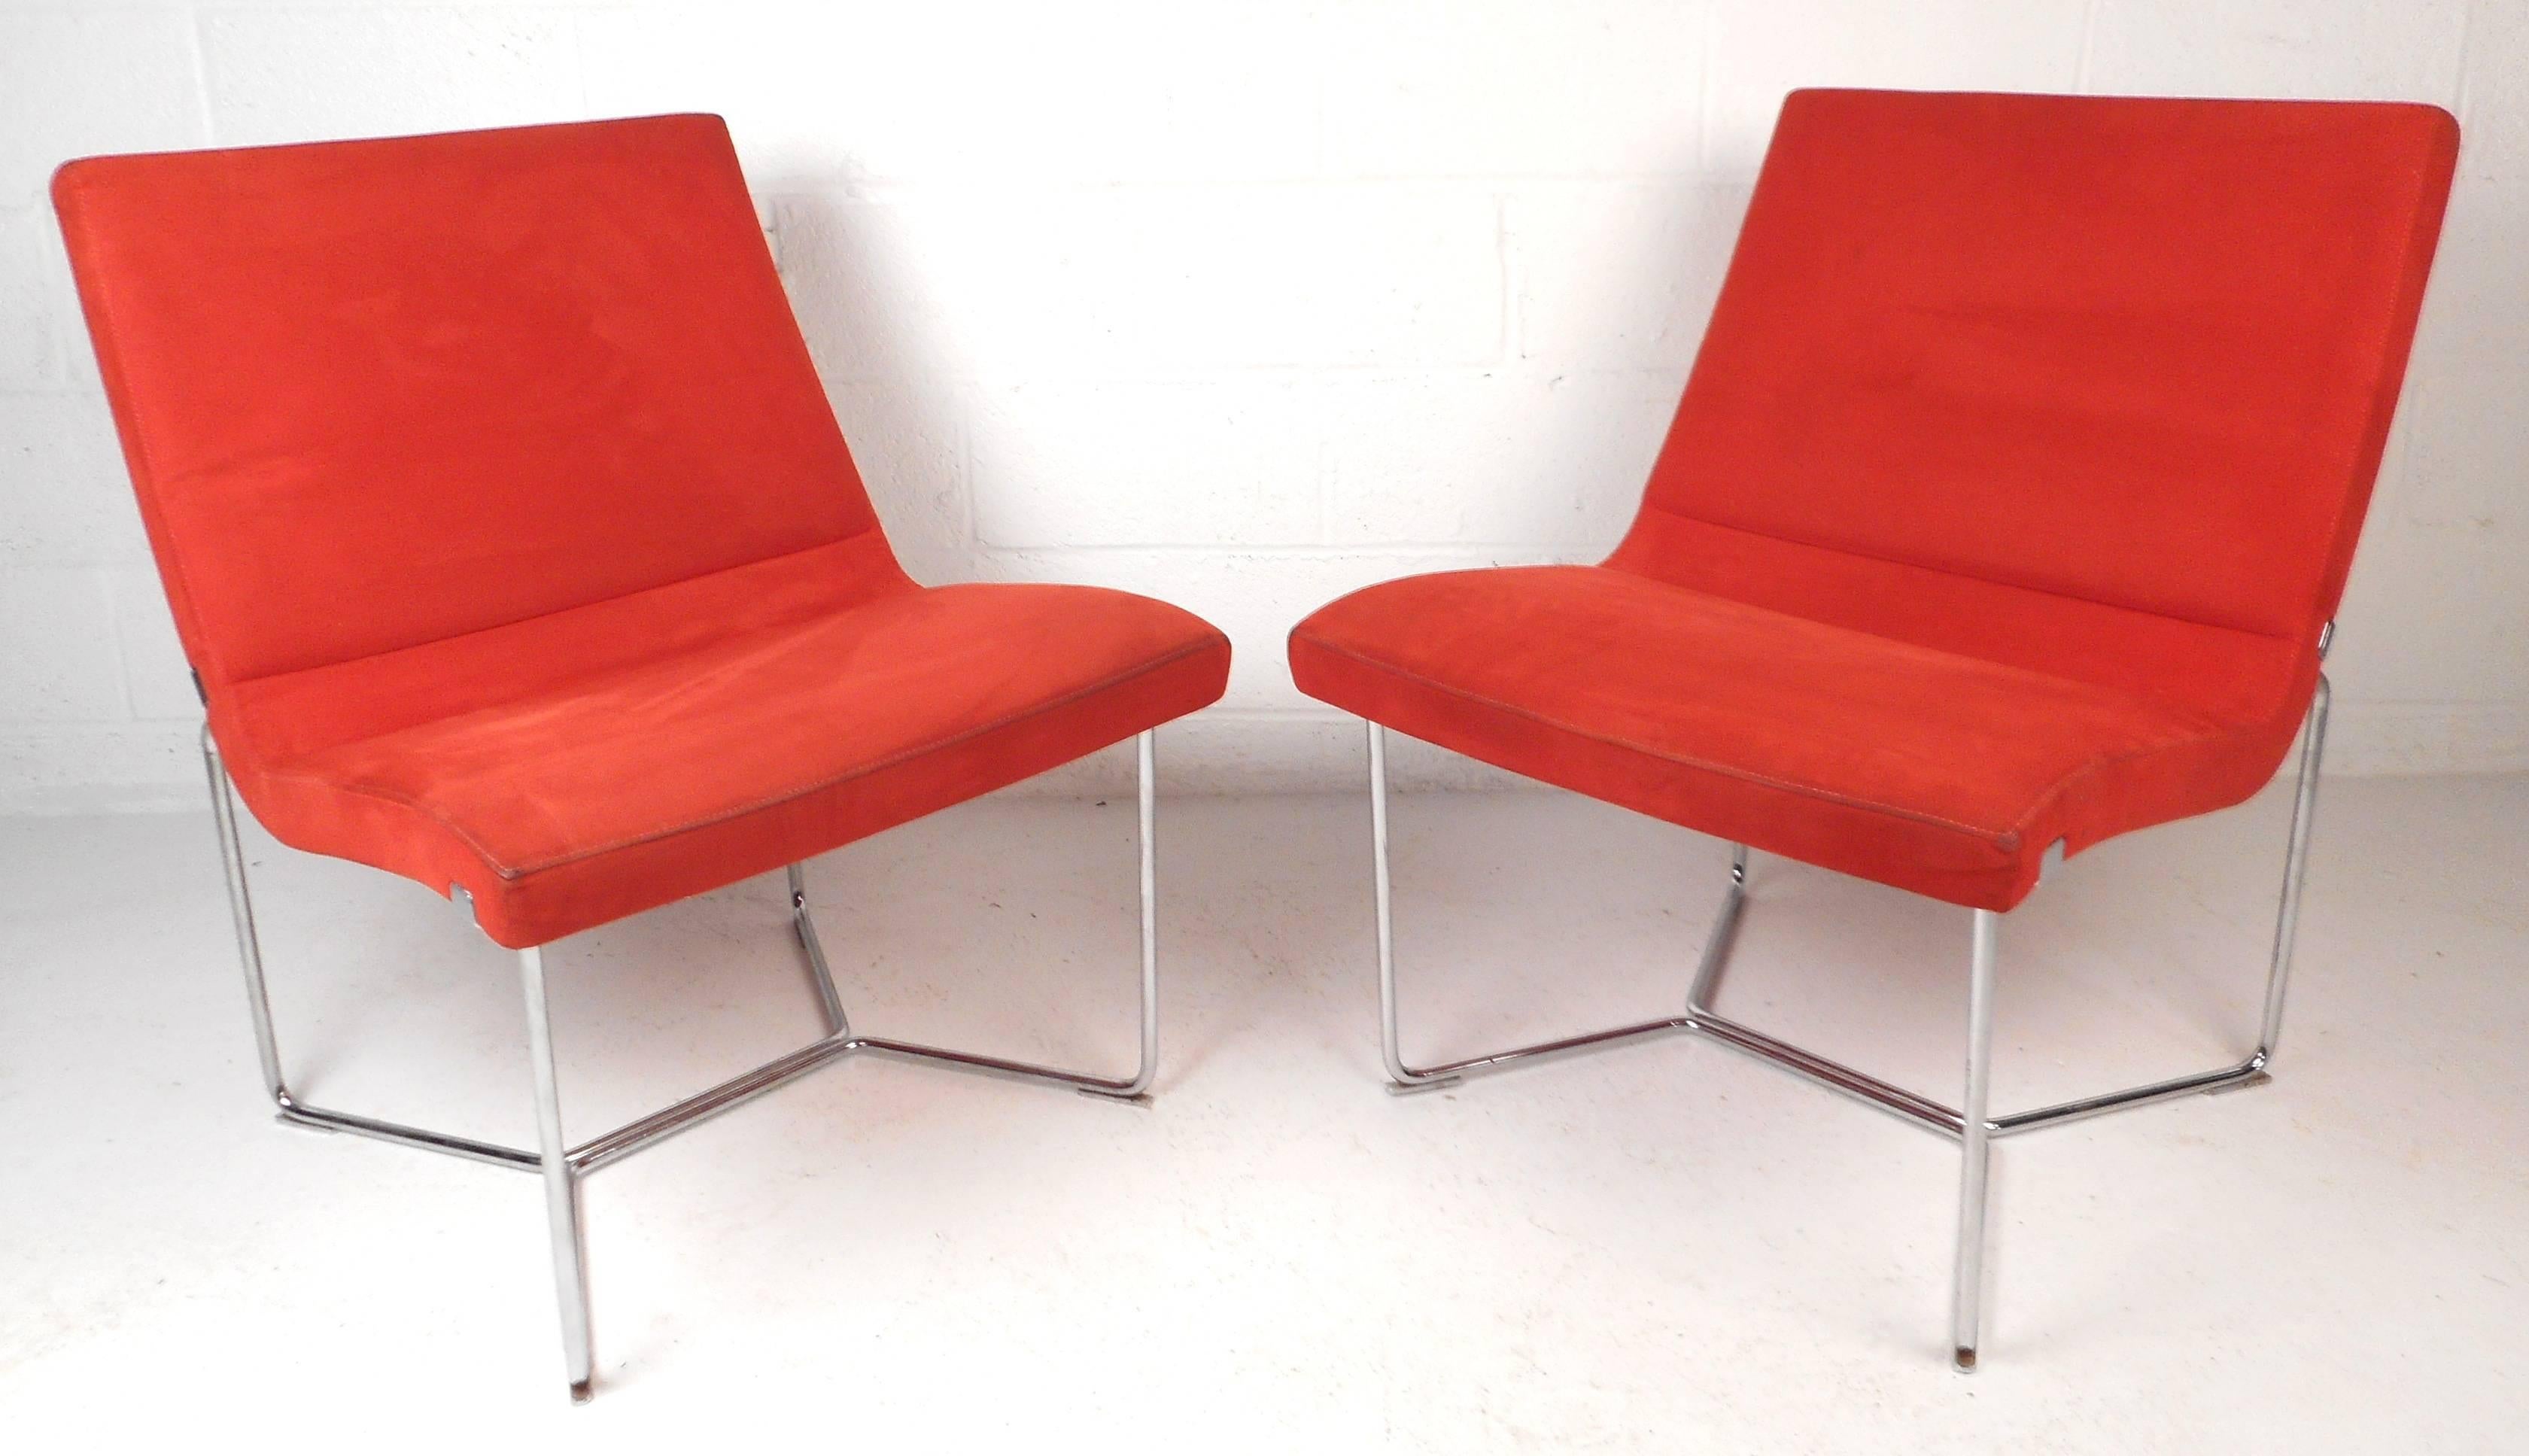 Stunning pair of mid-century modern slipper lounge chairs feature plush bright red velvet upholstery and a tubular bent rod chrome base. The sleek design from Harter Furniture, out of Michigan, provides comfortable seating and certainly adds